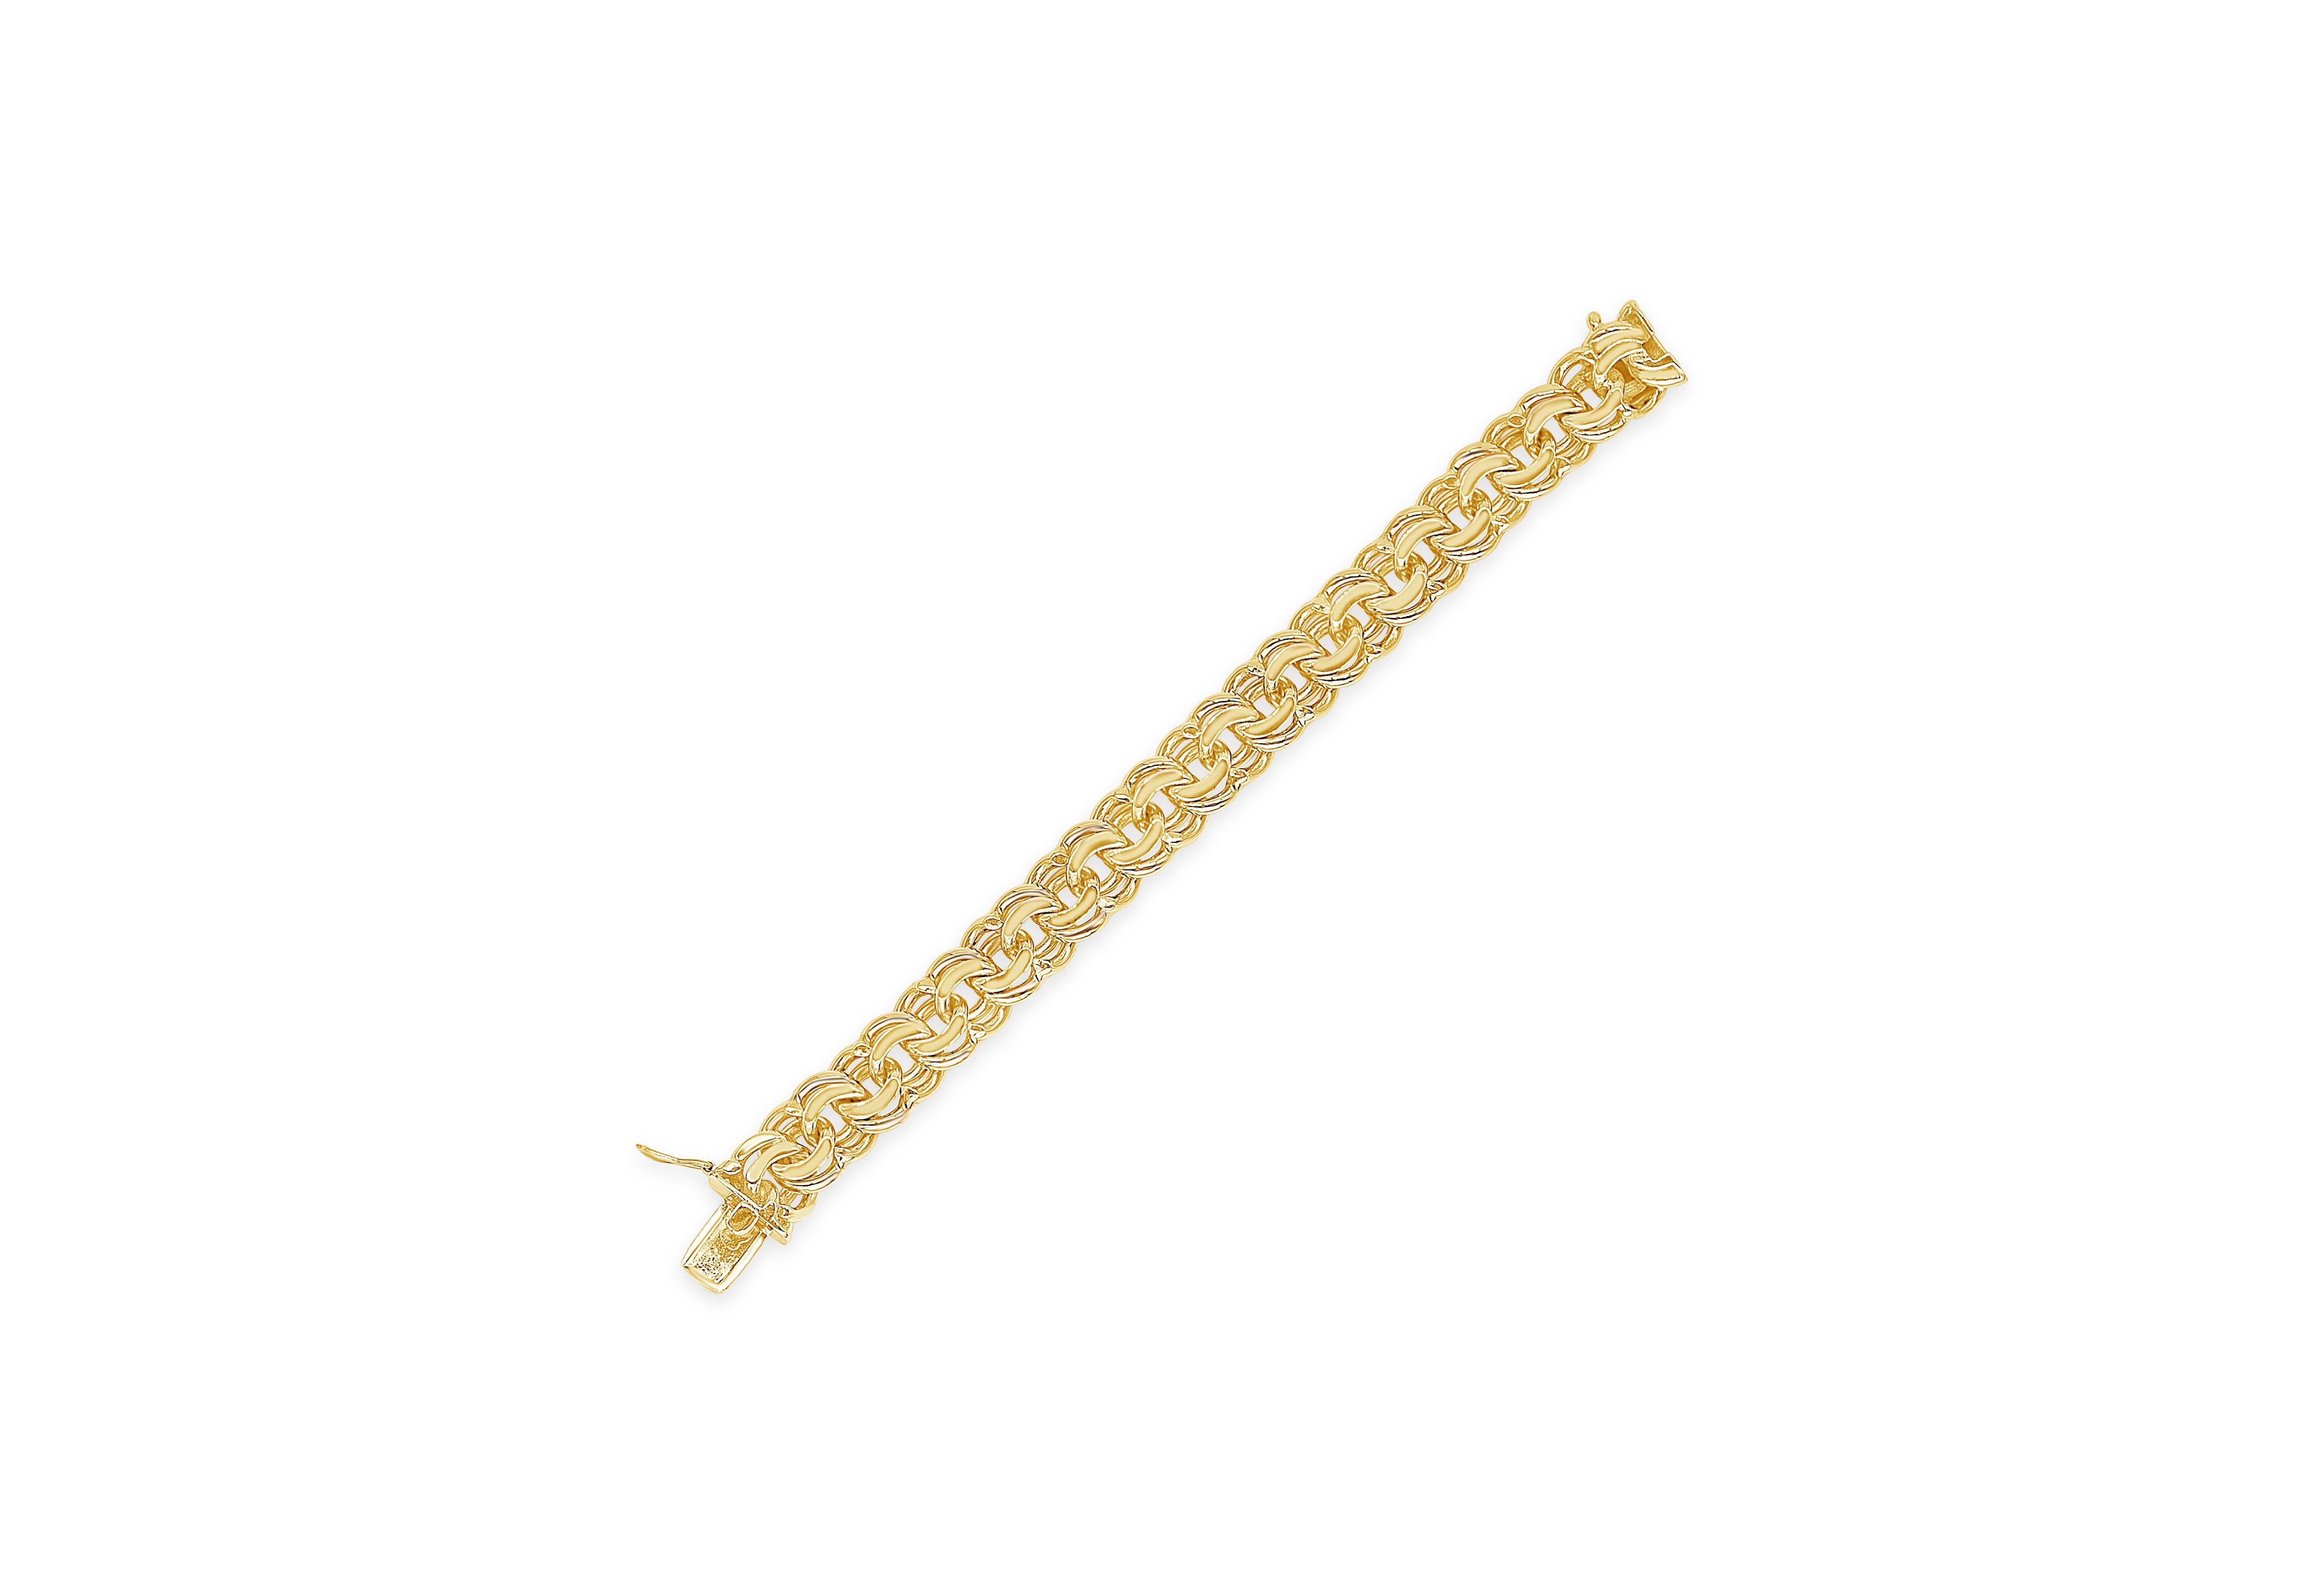 Showcasing intertwined links made in 14 karat yellow gold. 

Weight: 69.15 grams
Length: 7.25 inches
Width: 0.53 inches

